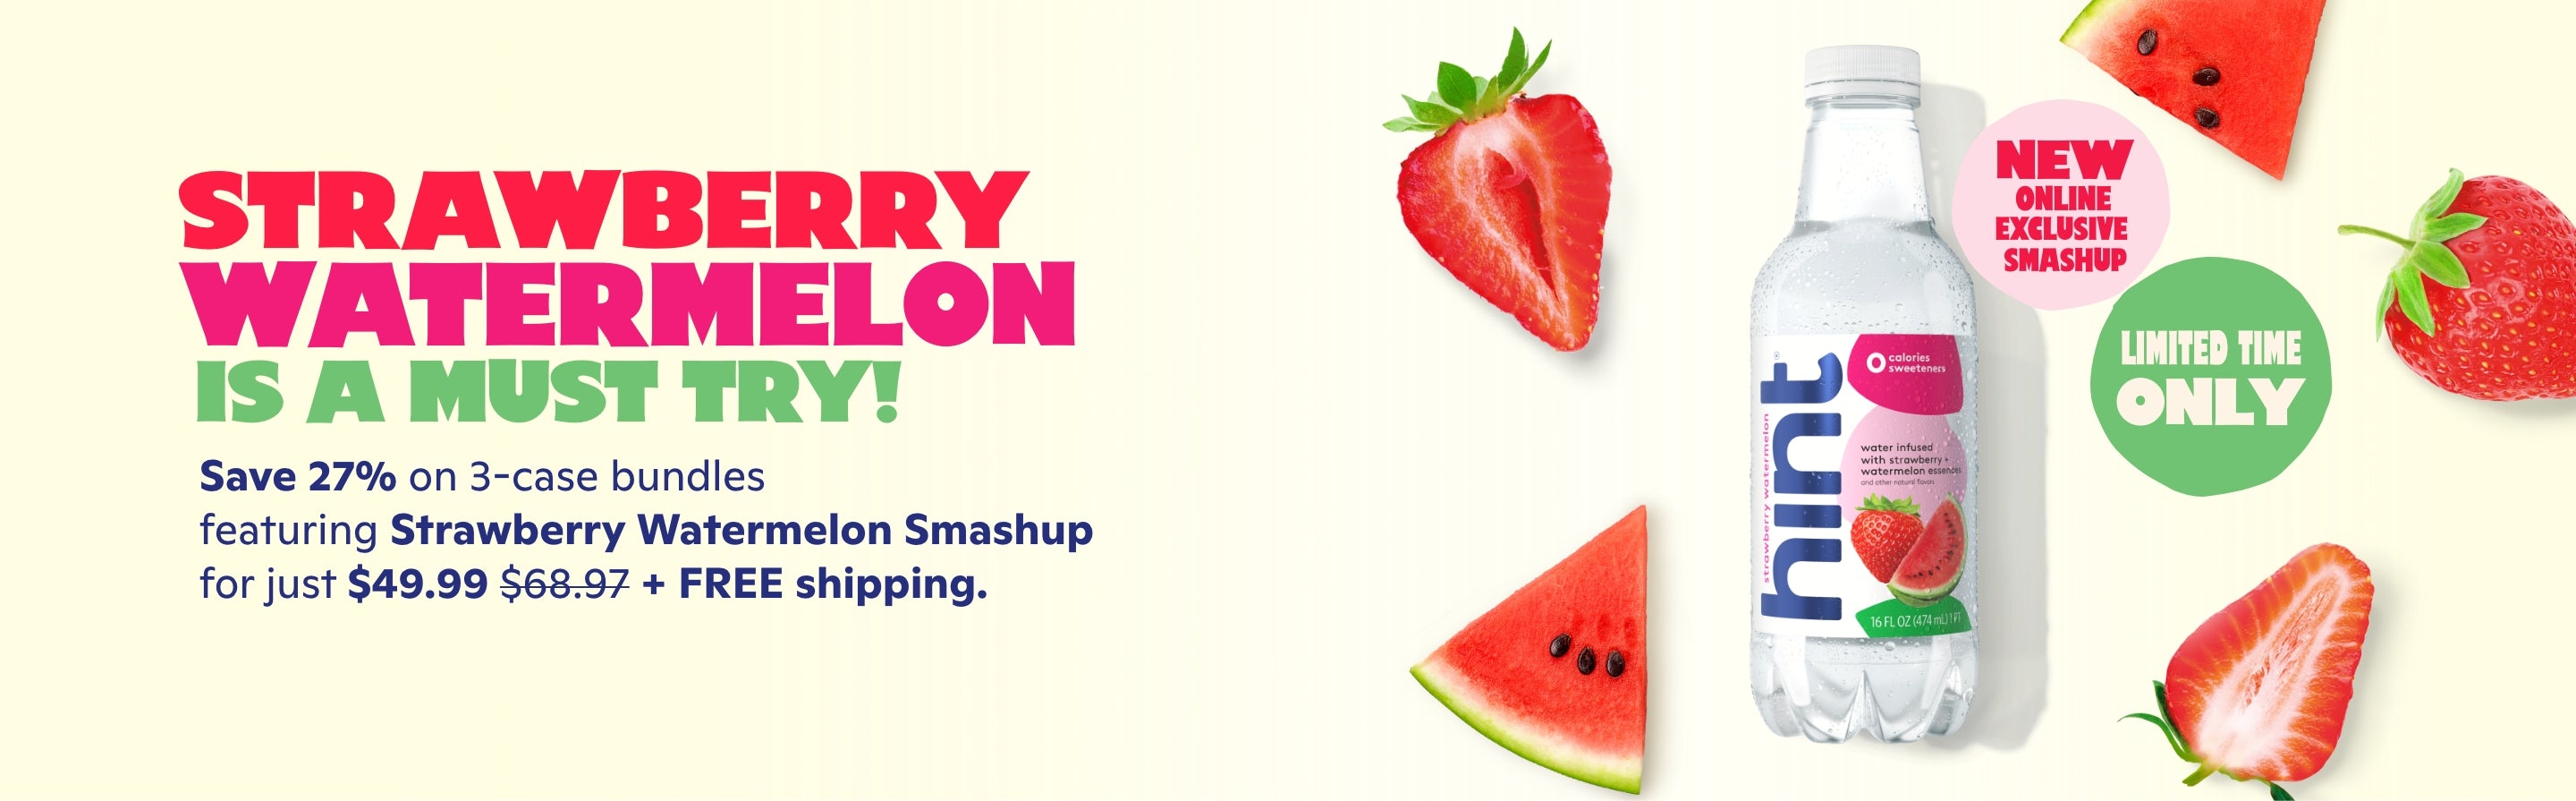 <h1> Strawberry Watermelon is a must try!</h1> <p><br> Save 27% on 3 cases bundles featuring Strawberry Watermelon! <br> Get 3 case bundles for $49.99 + FREE shipping </p>